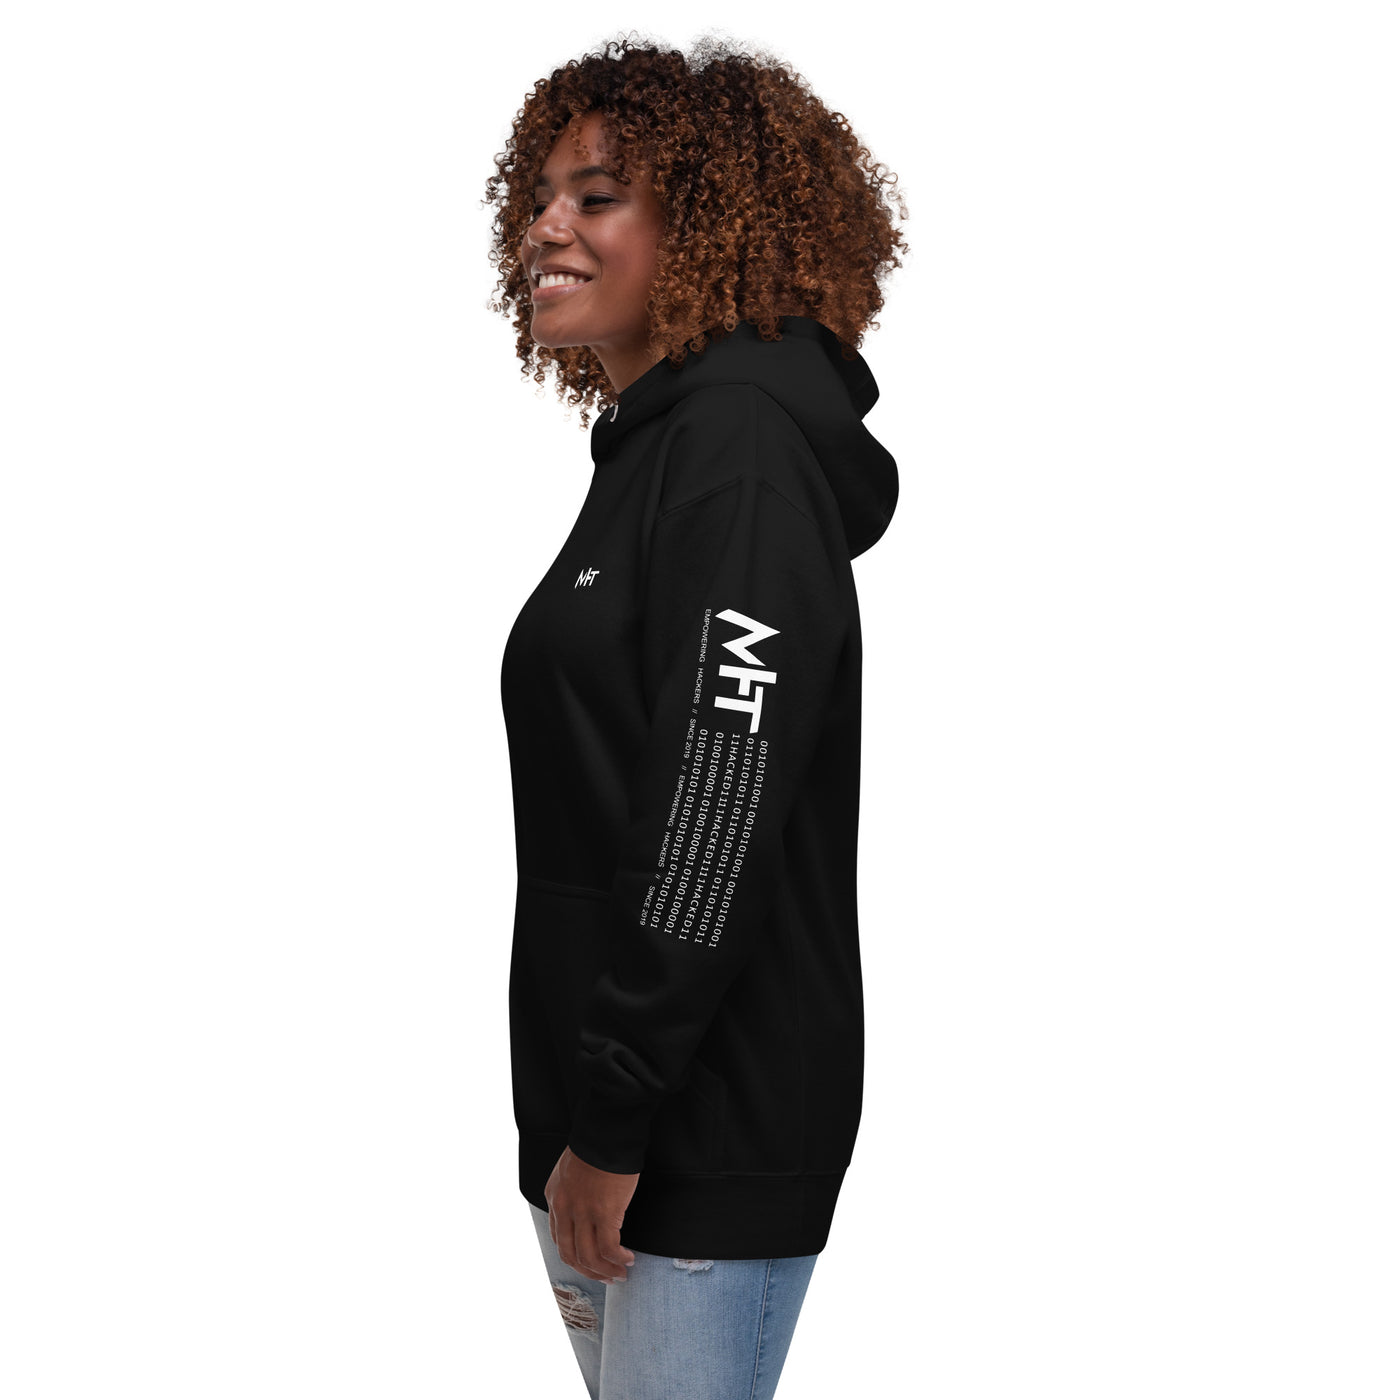 I can't Believe I Paused my Game for this - Unisex Hoodie ( Back Print )